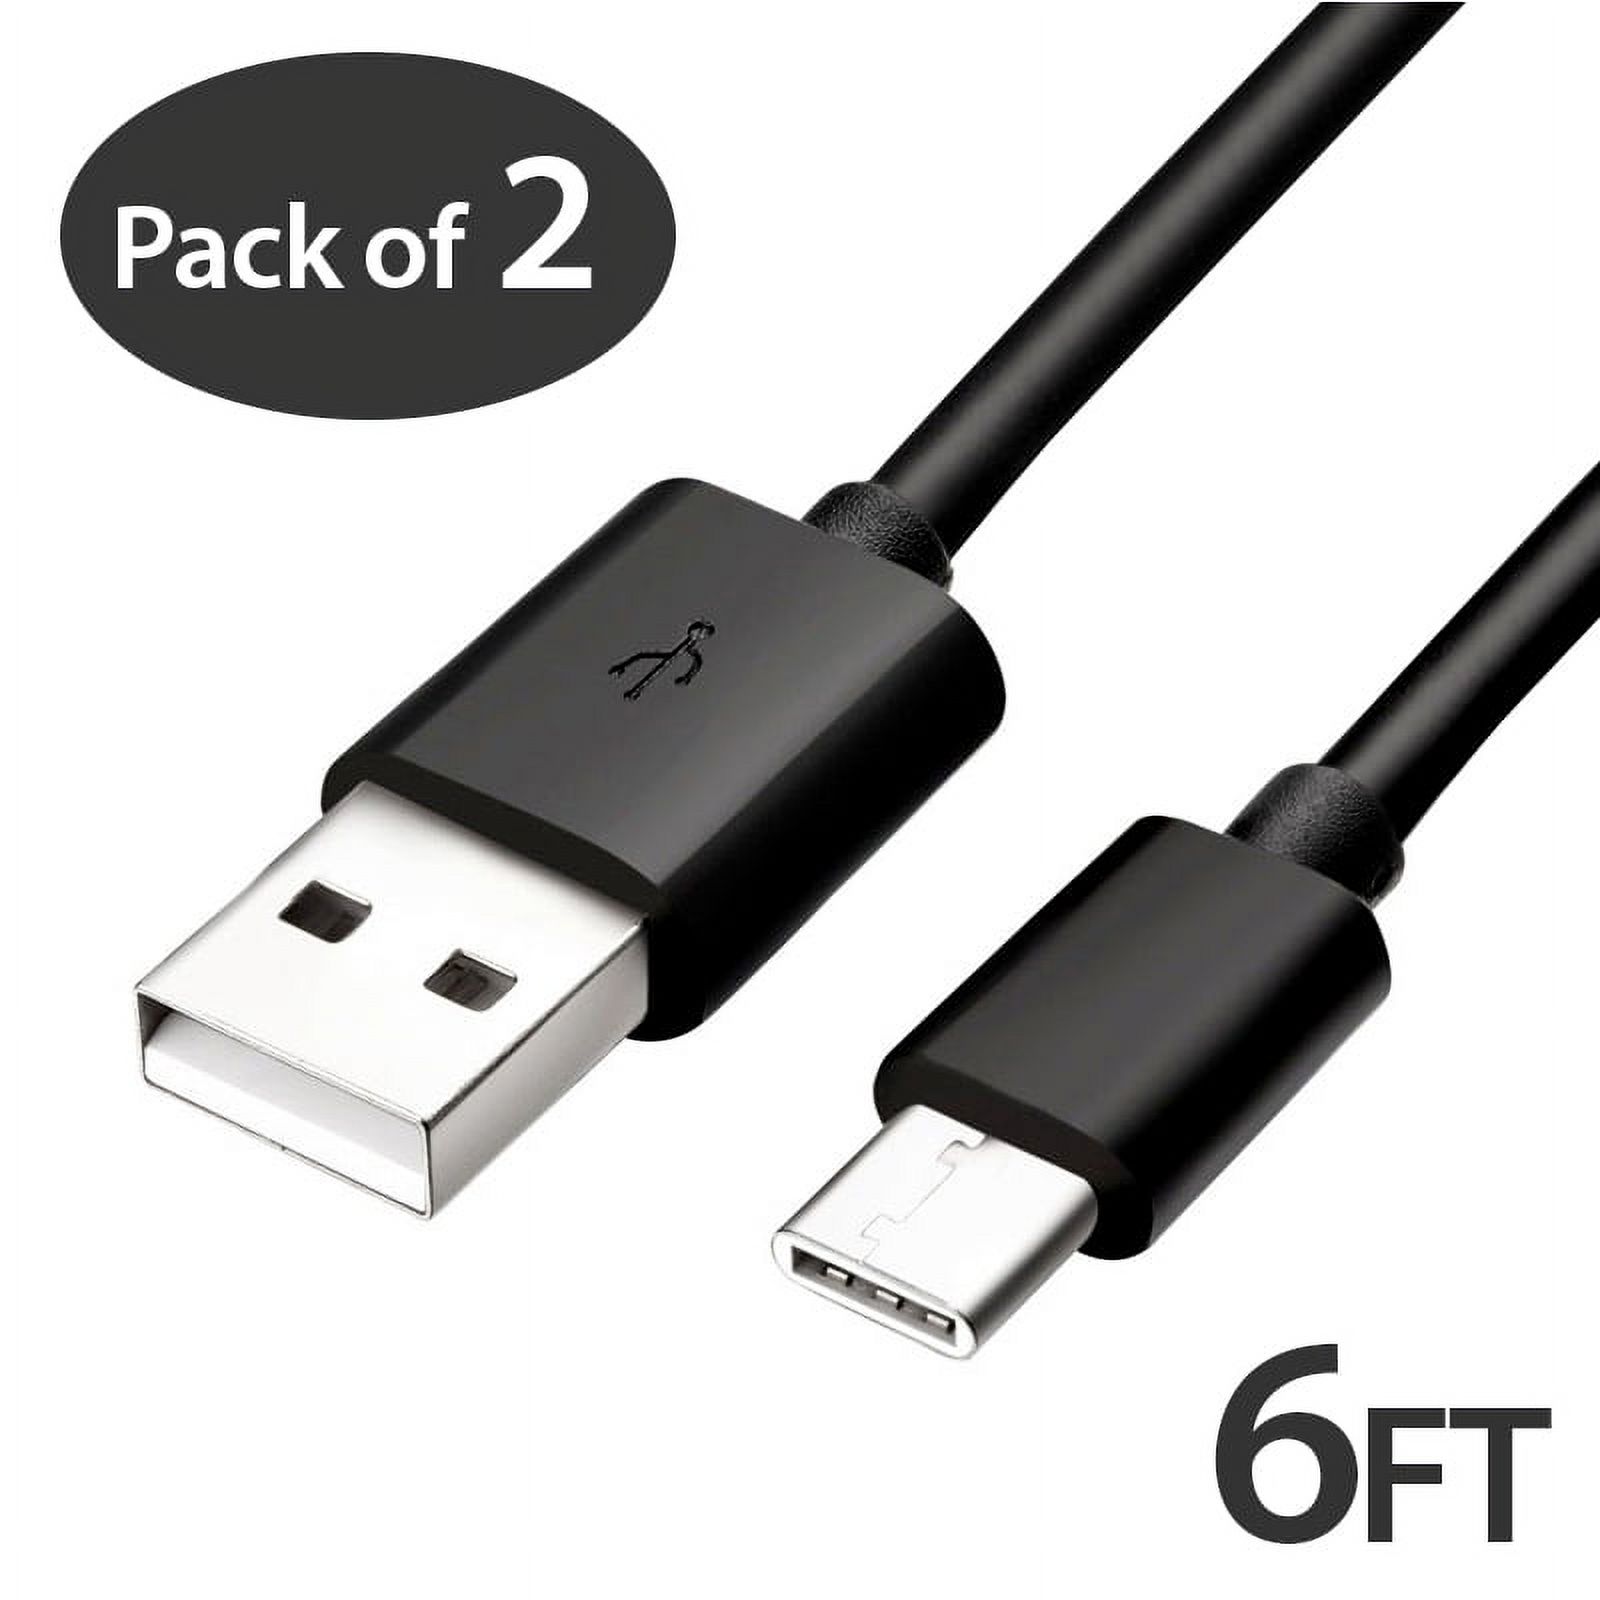 2x 6FT USB Type C Cable Fast Charging Cable USB-C Type-C 3.1 Data Sync Charger Cable Cord For Samsung Galaxy S9 S9+ Galaxy S8 S8 Plus Nexus 5X 6P OnePlus 2 3 LG G5 G6 V20 HTC M10 Google Pixel XL - image 1 of 1